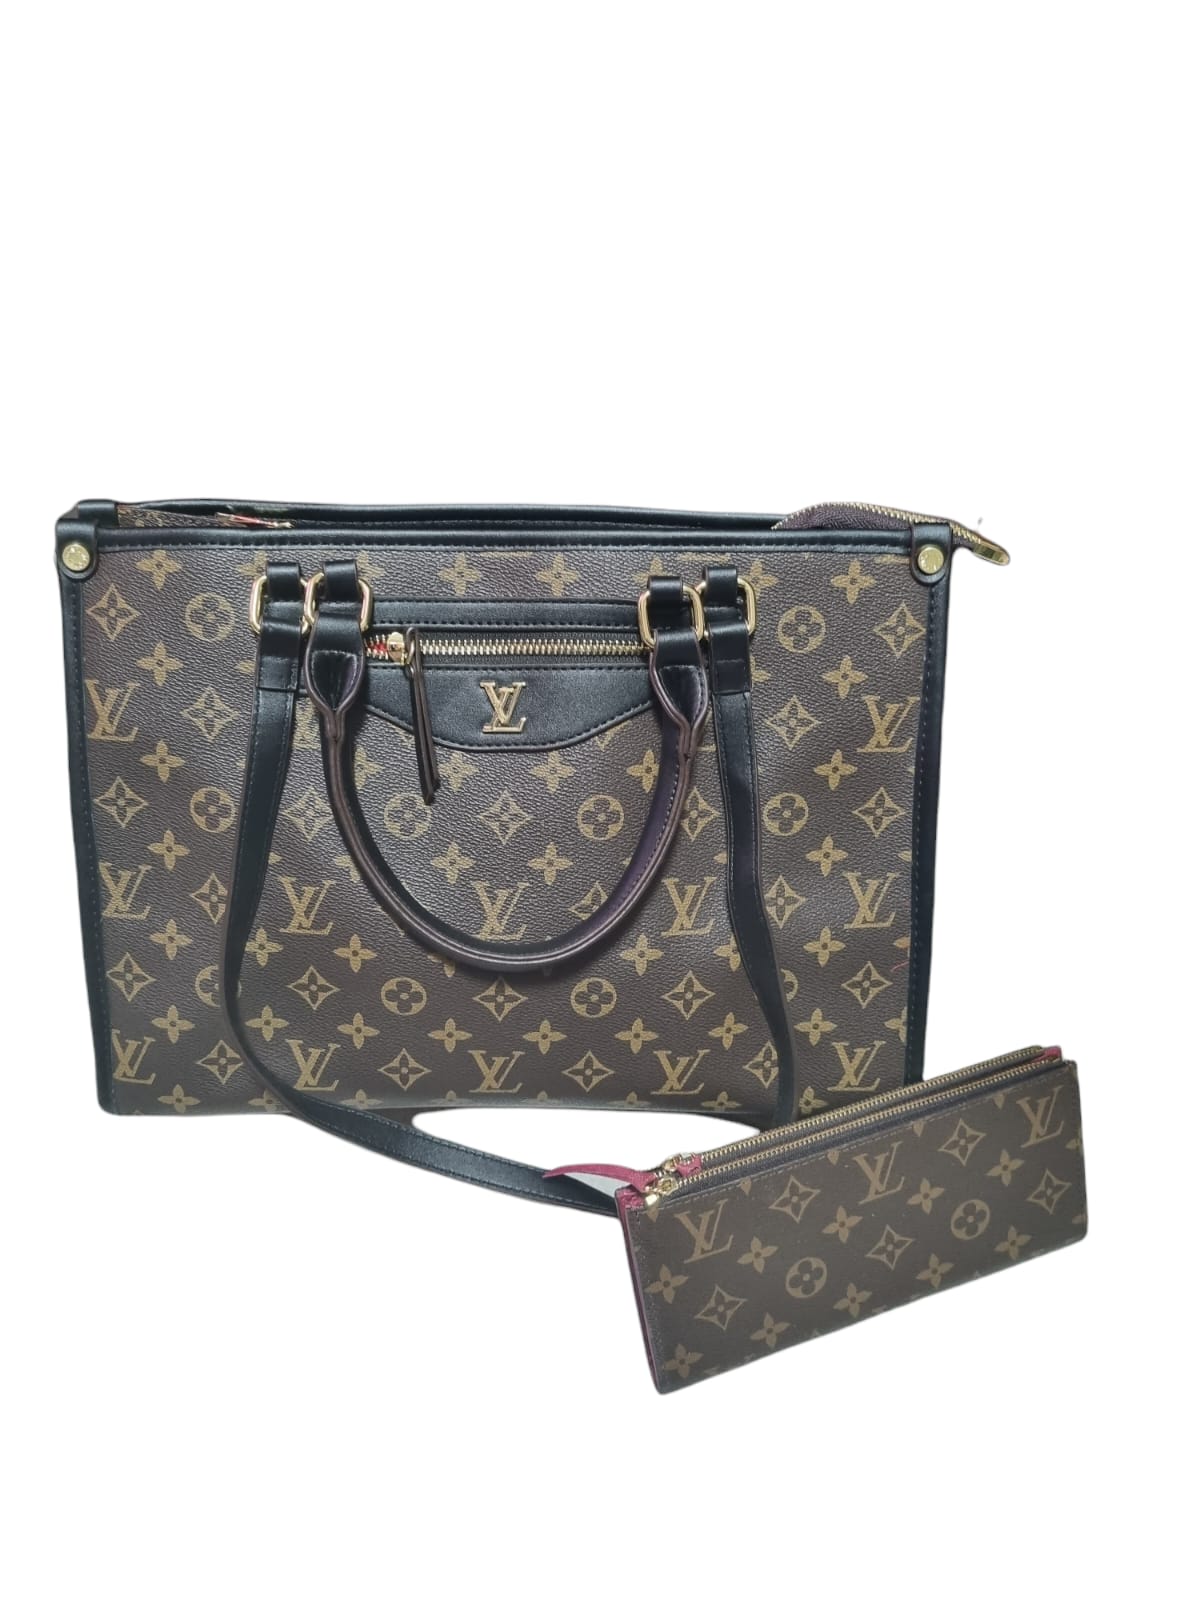 LV Bag - White and Brown With Purse - Fragrance Deliver SA